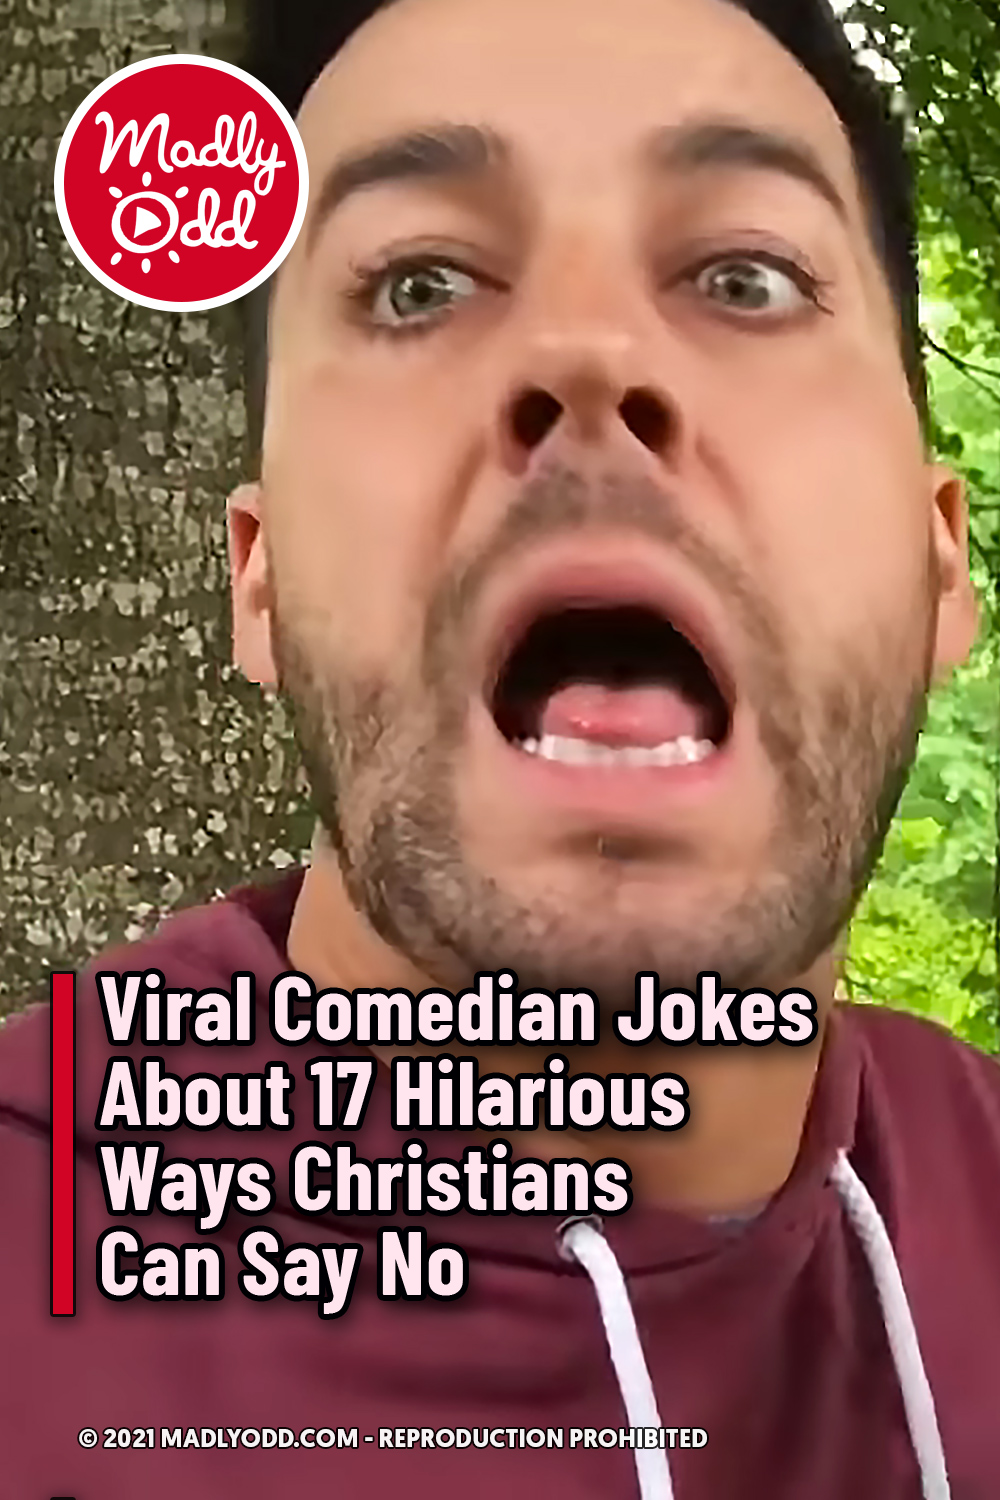 Viral Comedian Jokes About 17 Hilarious Ways Christians Can Say No